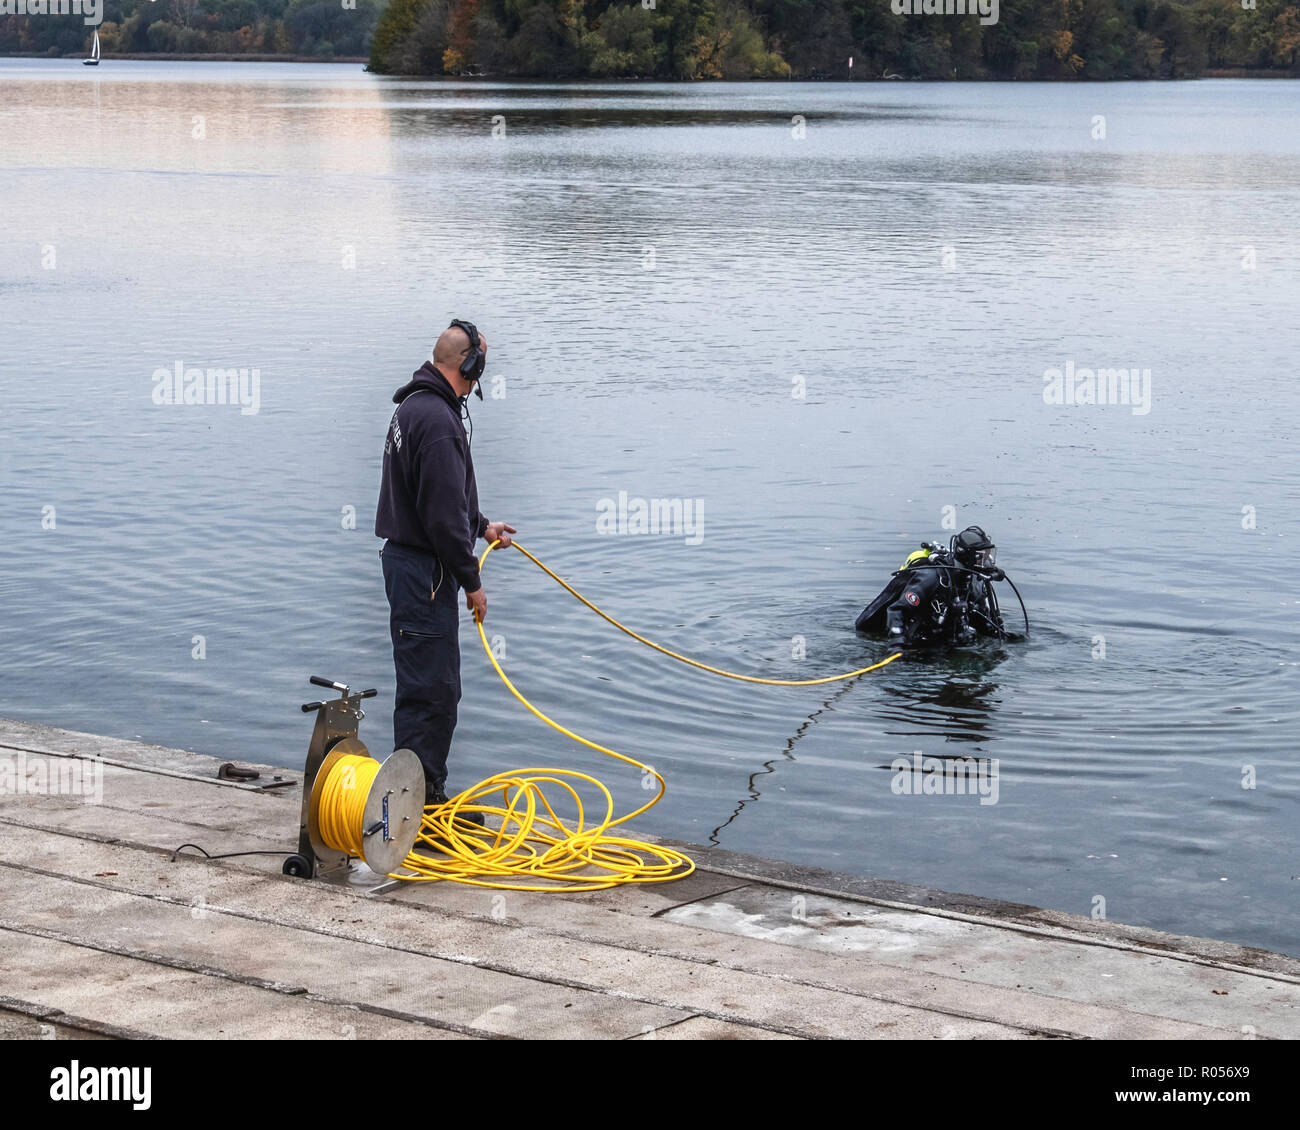 Tegel Lake,Berlin,Germany. 1st November 2018. Police scuba divers diving in Tegel Lake. Two divers enter the water on life lines while a police boat patrols the surrounding water. Credit: Eden Breitz/Alamy Live News Stock Photo